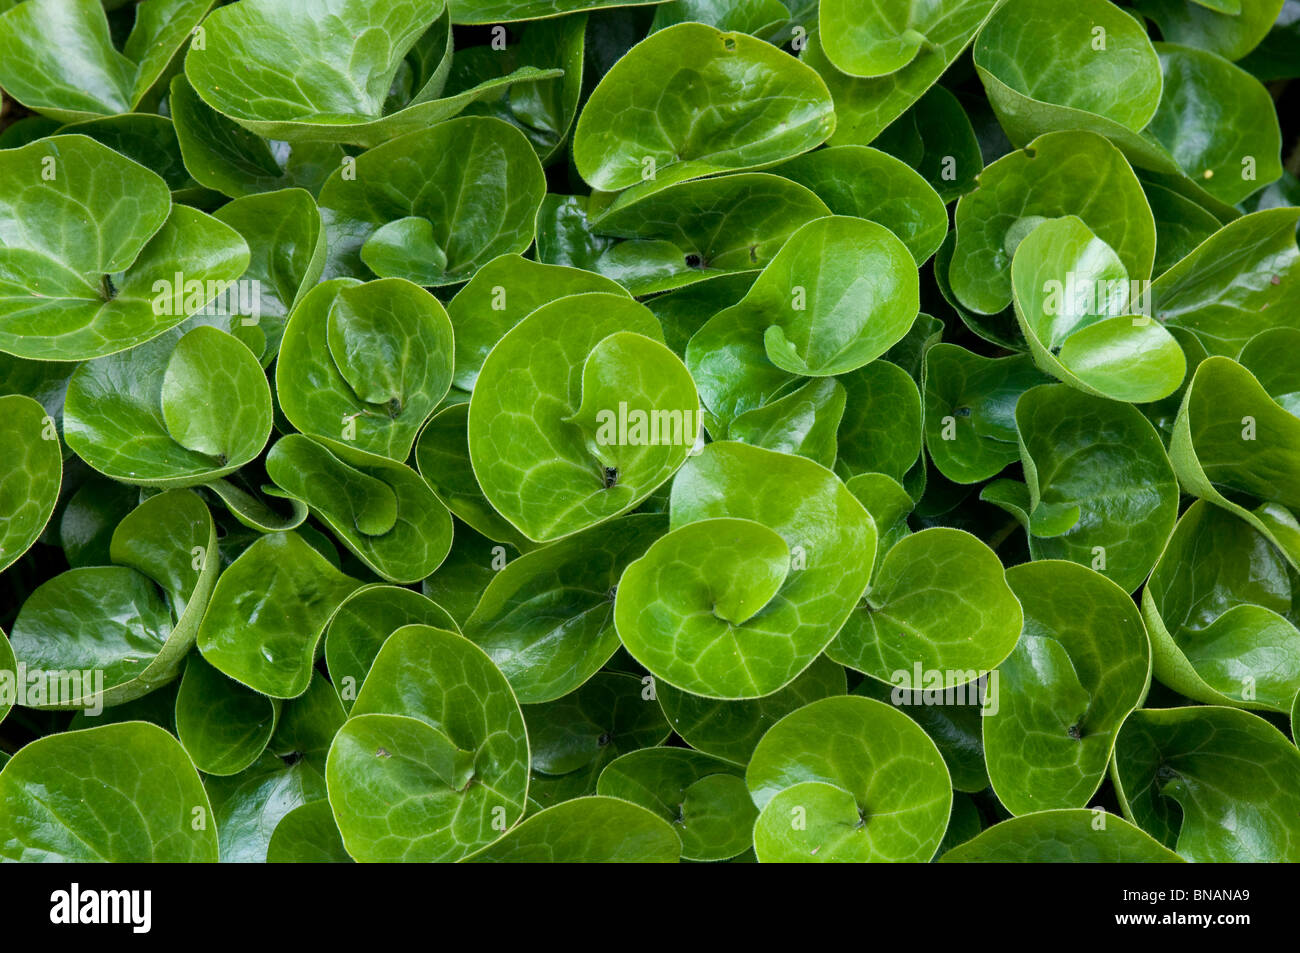 Shiny kidney-shaped leaves of Asarum europeaum, a creeping perennial plant Stock Photo